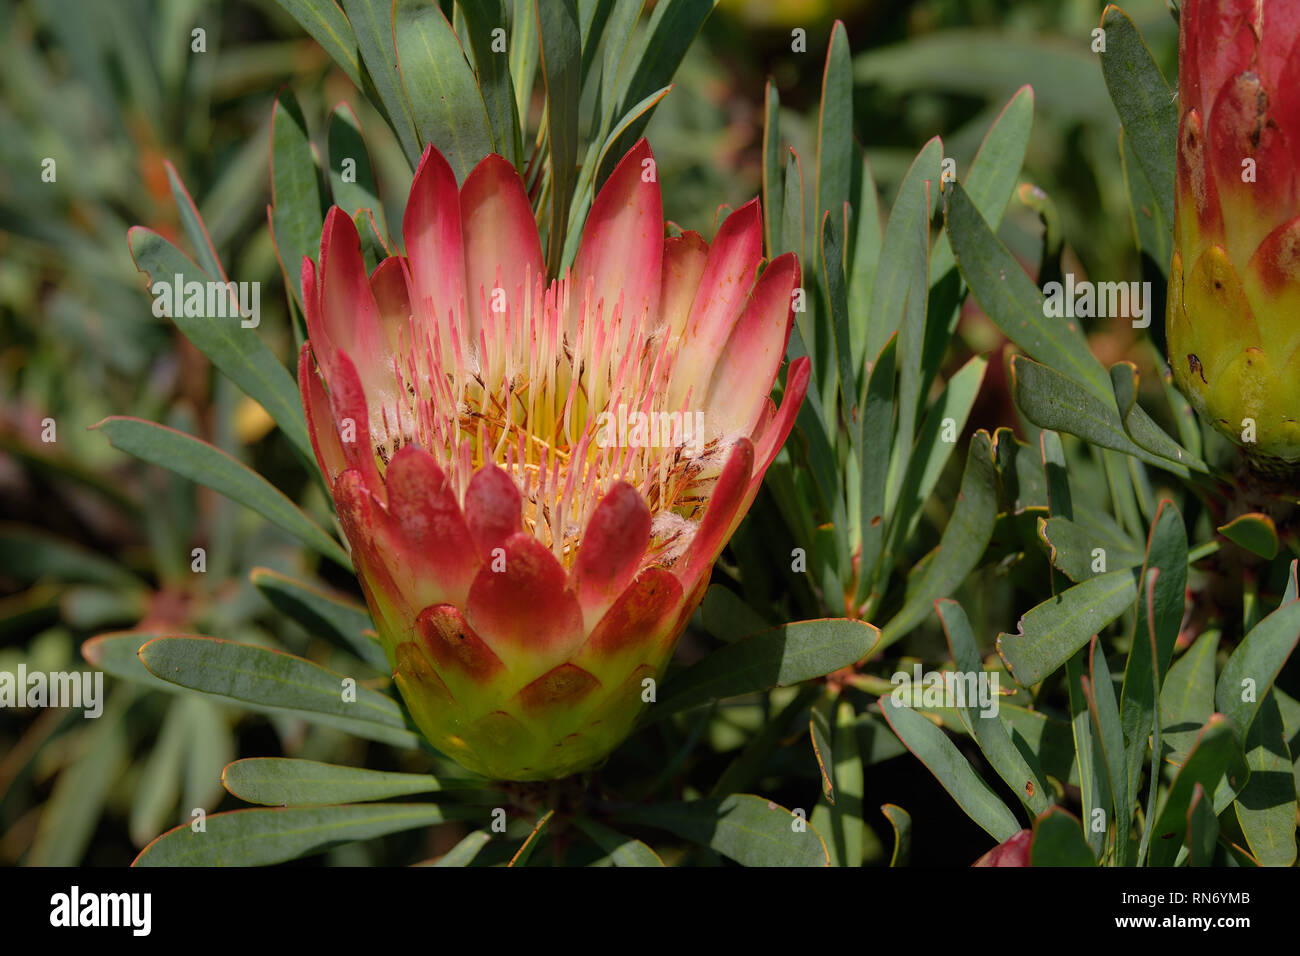 Sugarbush flower (Protea repens) against background on its own bush leaves Stock Photo